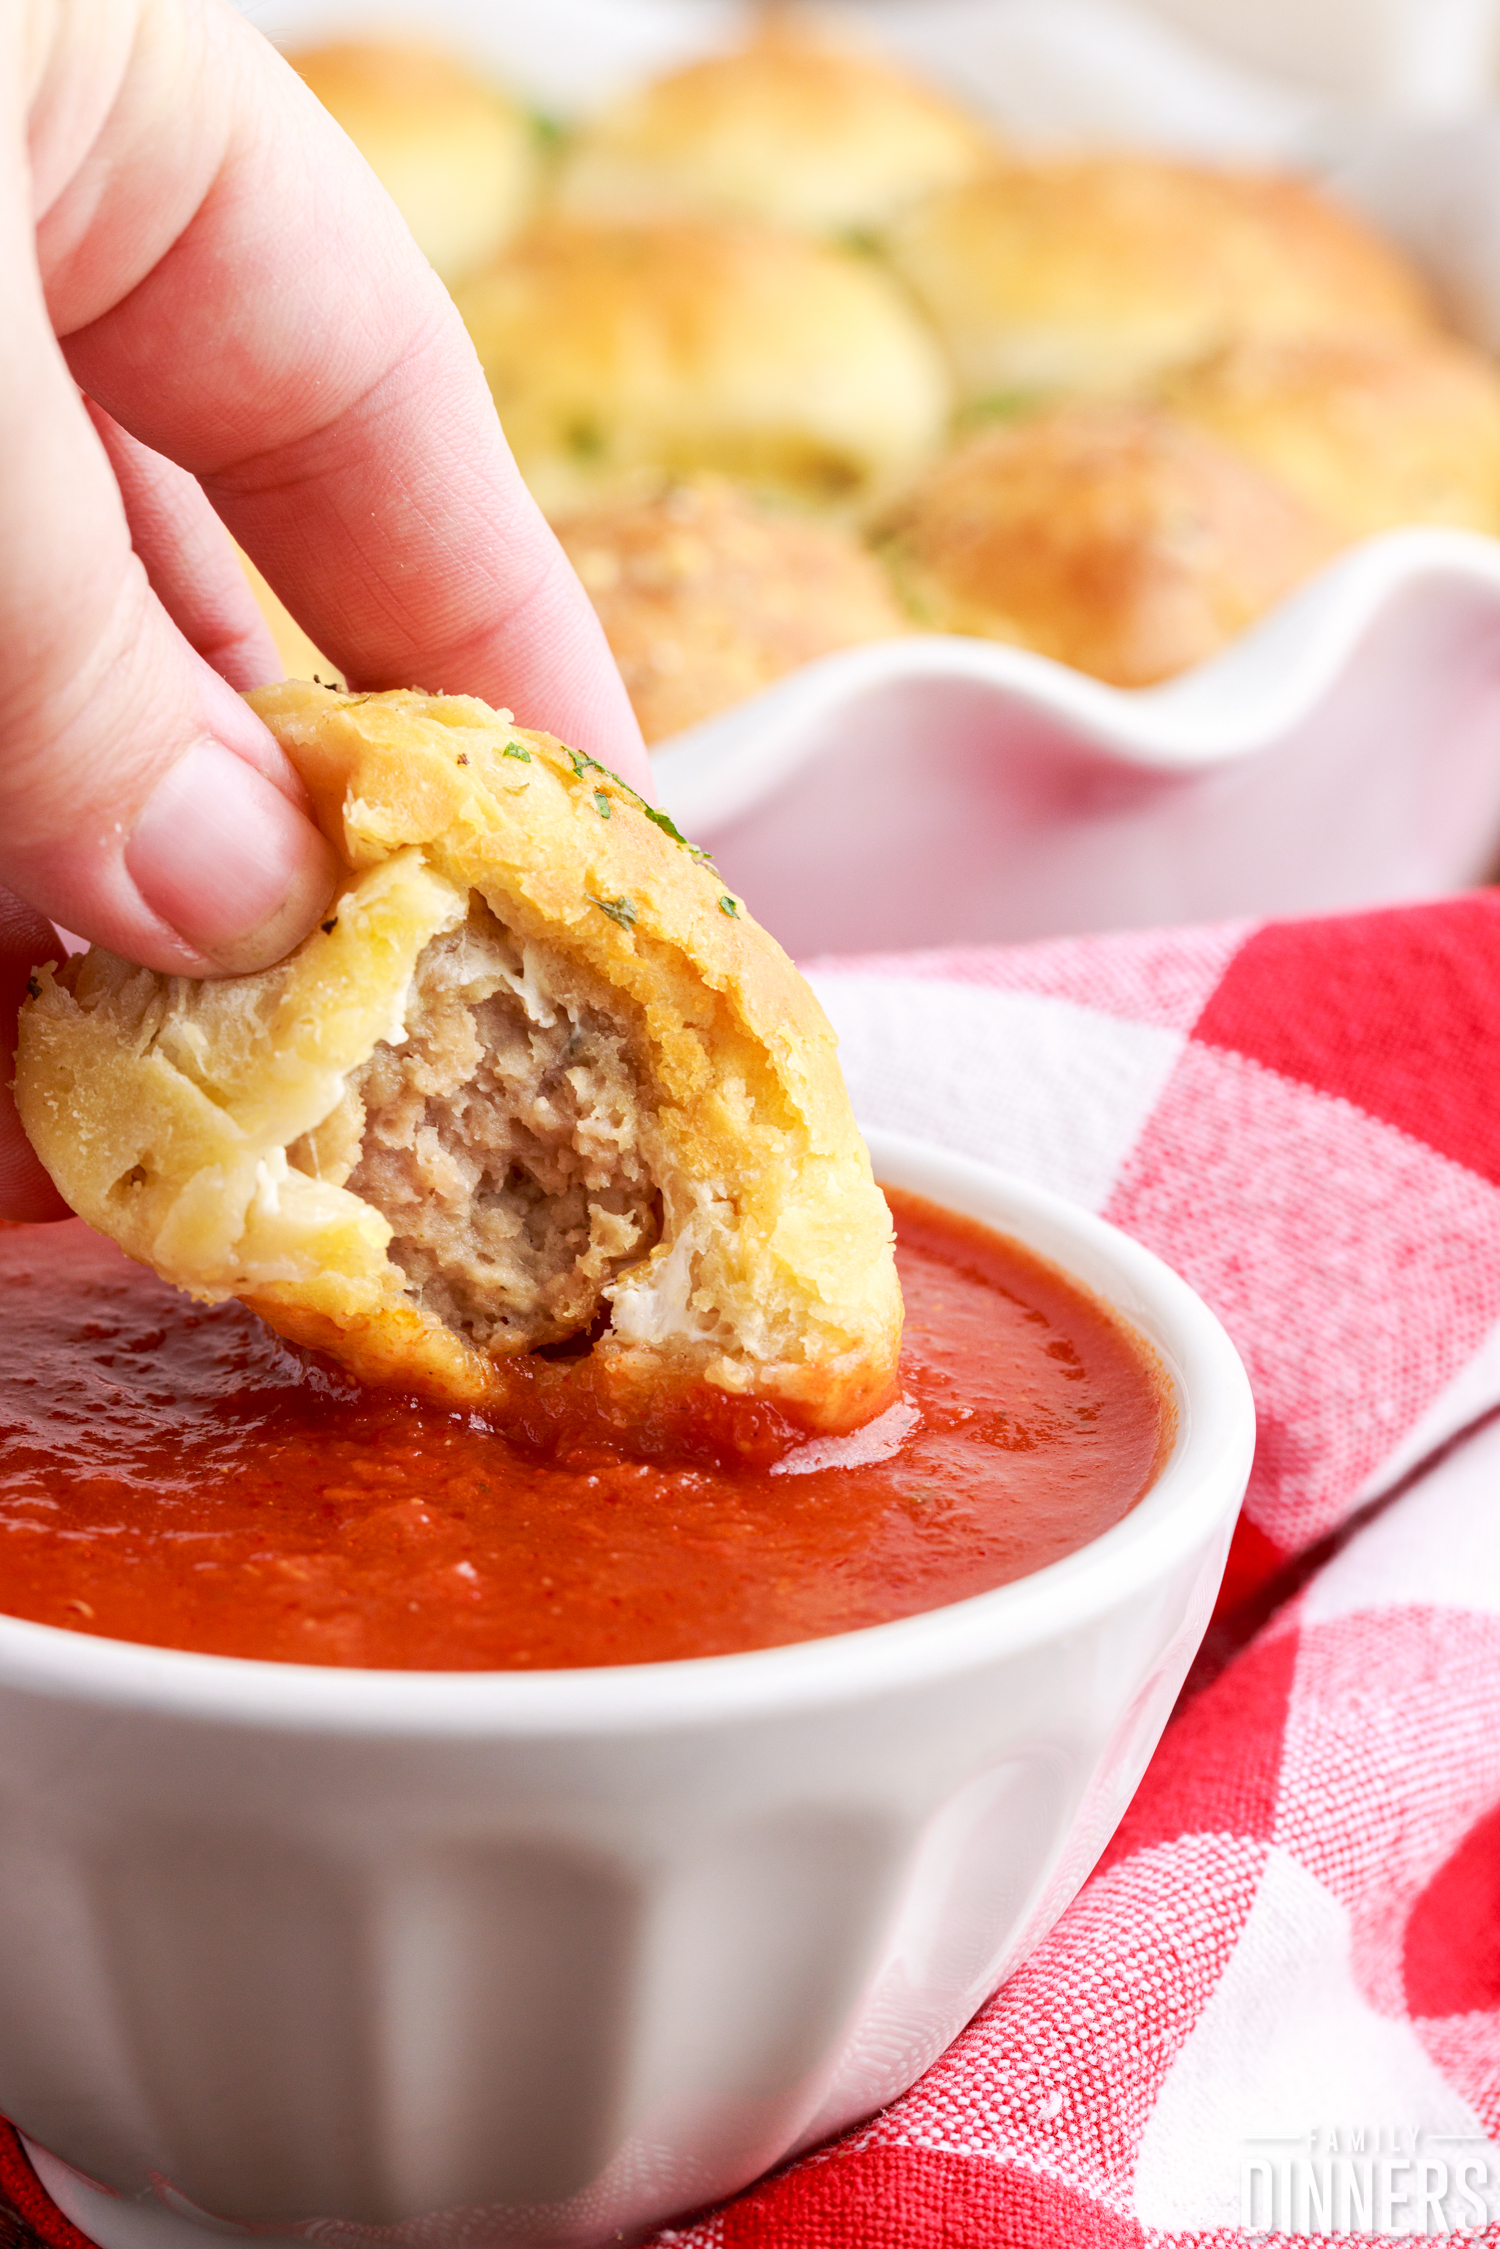 hand dipping a meatball stuffed biscuit into marinara sauce